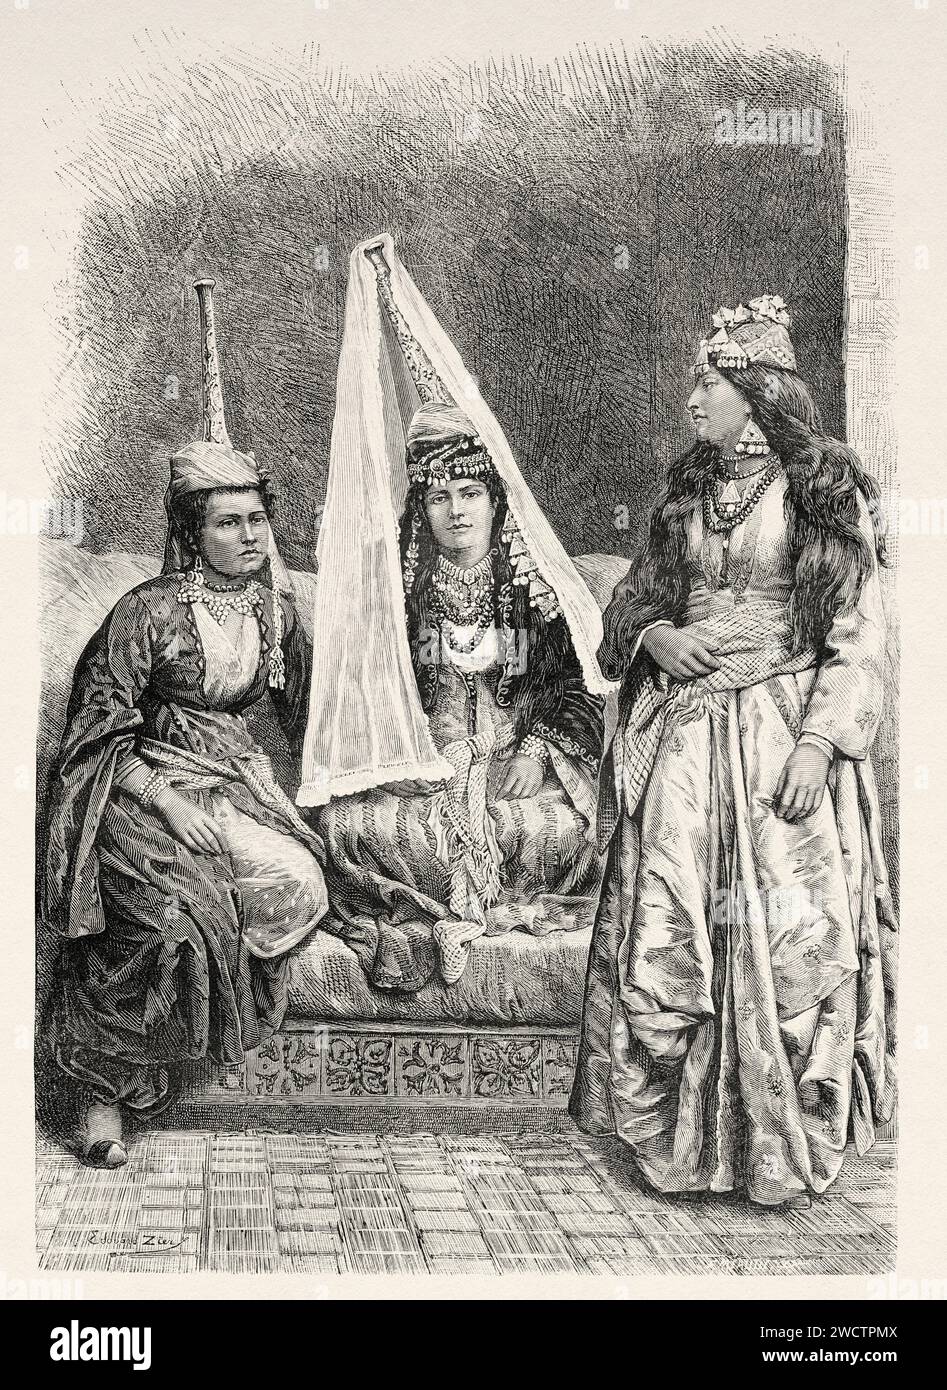 The traditional vertigious tantour hat of a married Druze, Lebanon. Travel to Syria 1875-1878 by Charles Louis Lortet (1836 - 1909) Old 19th century engraving from Le Tour du Monde 1880 Stock Photo